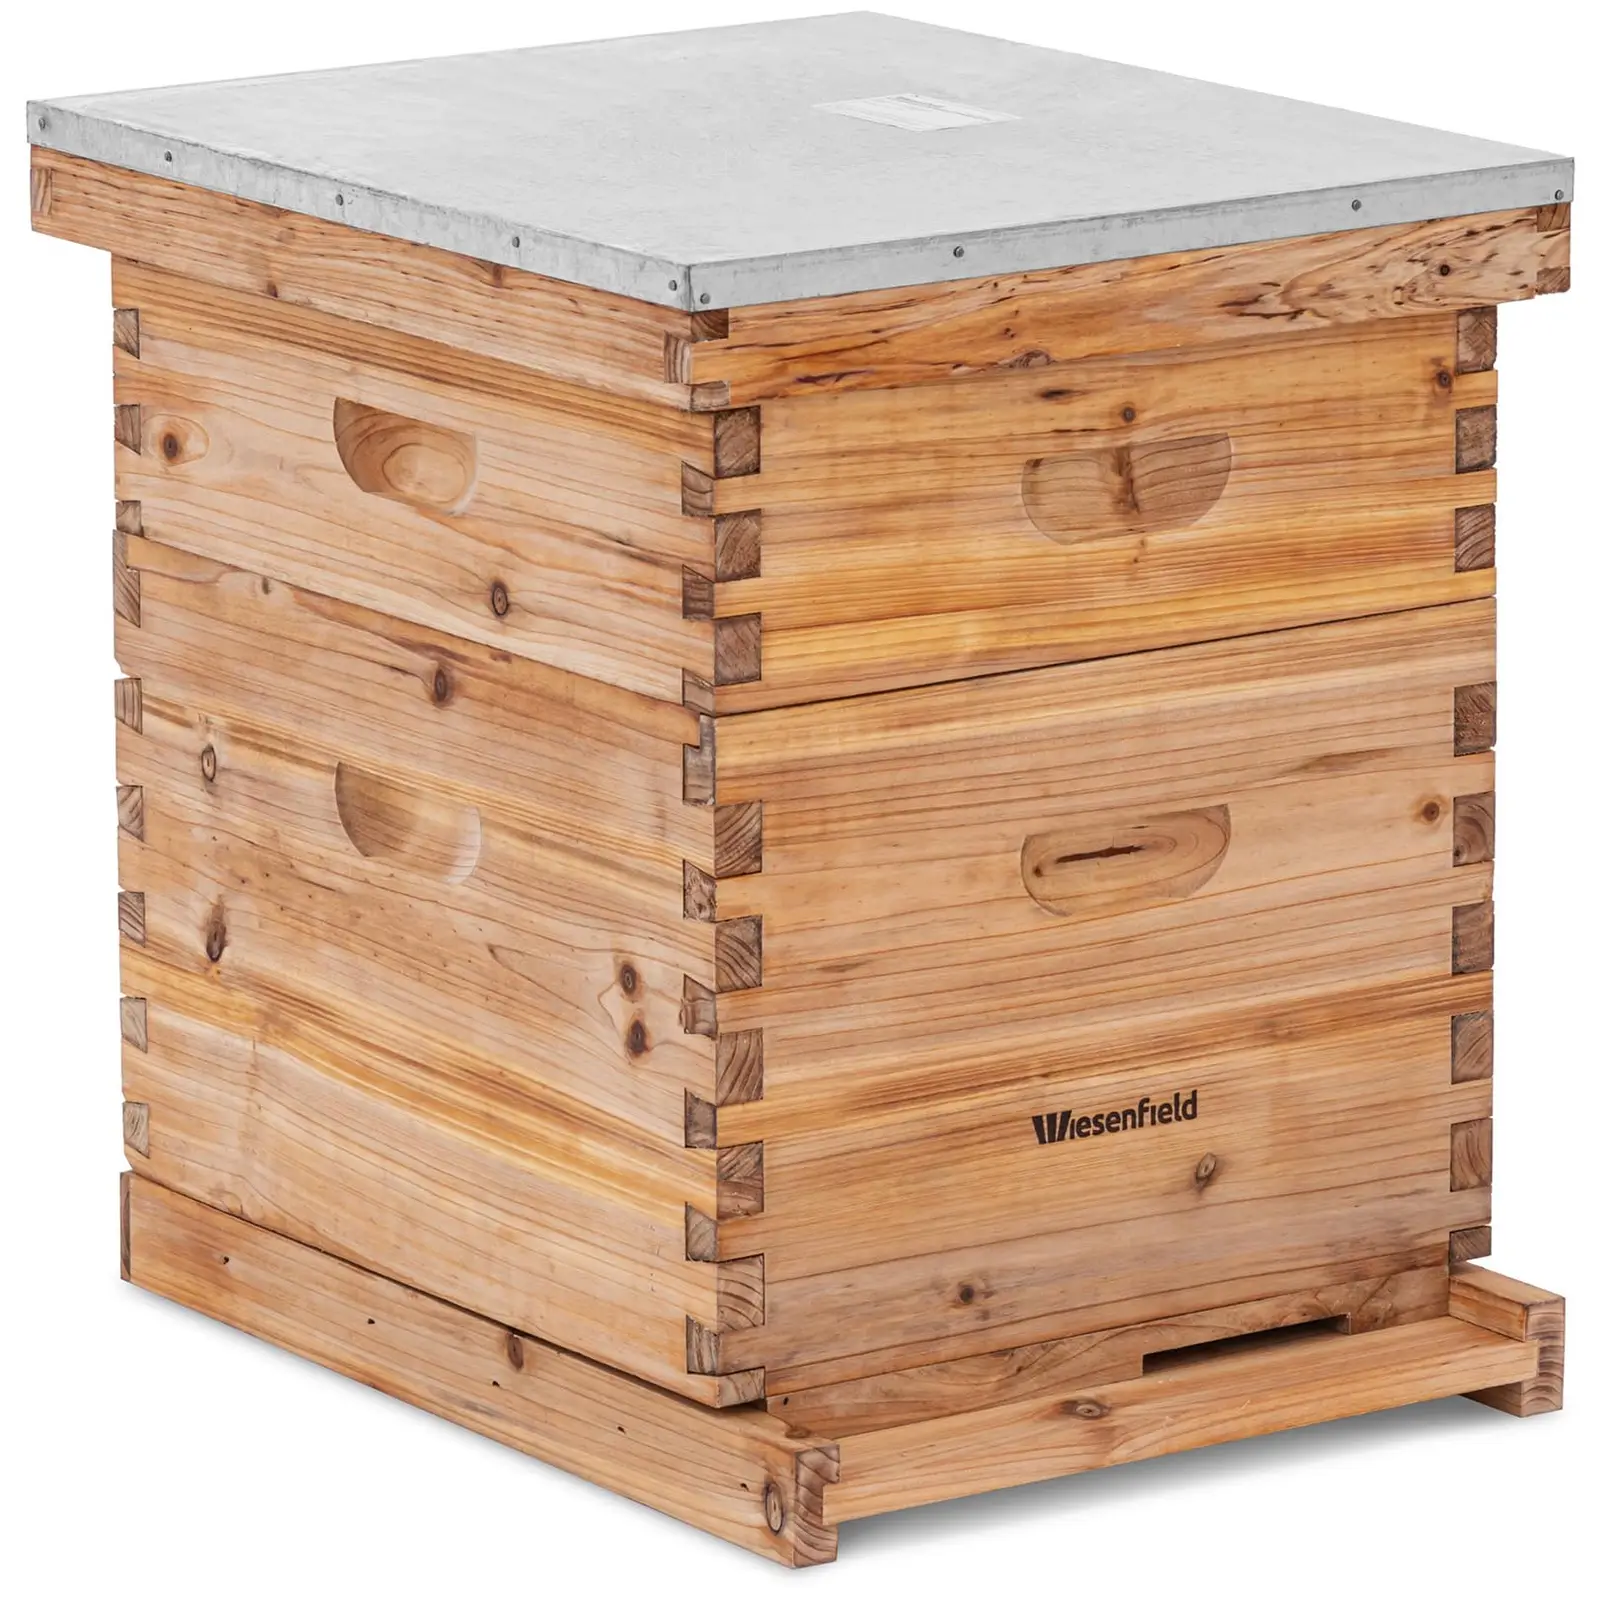 Dadant beehive–2 frames and base cassette with entrance hole